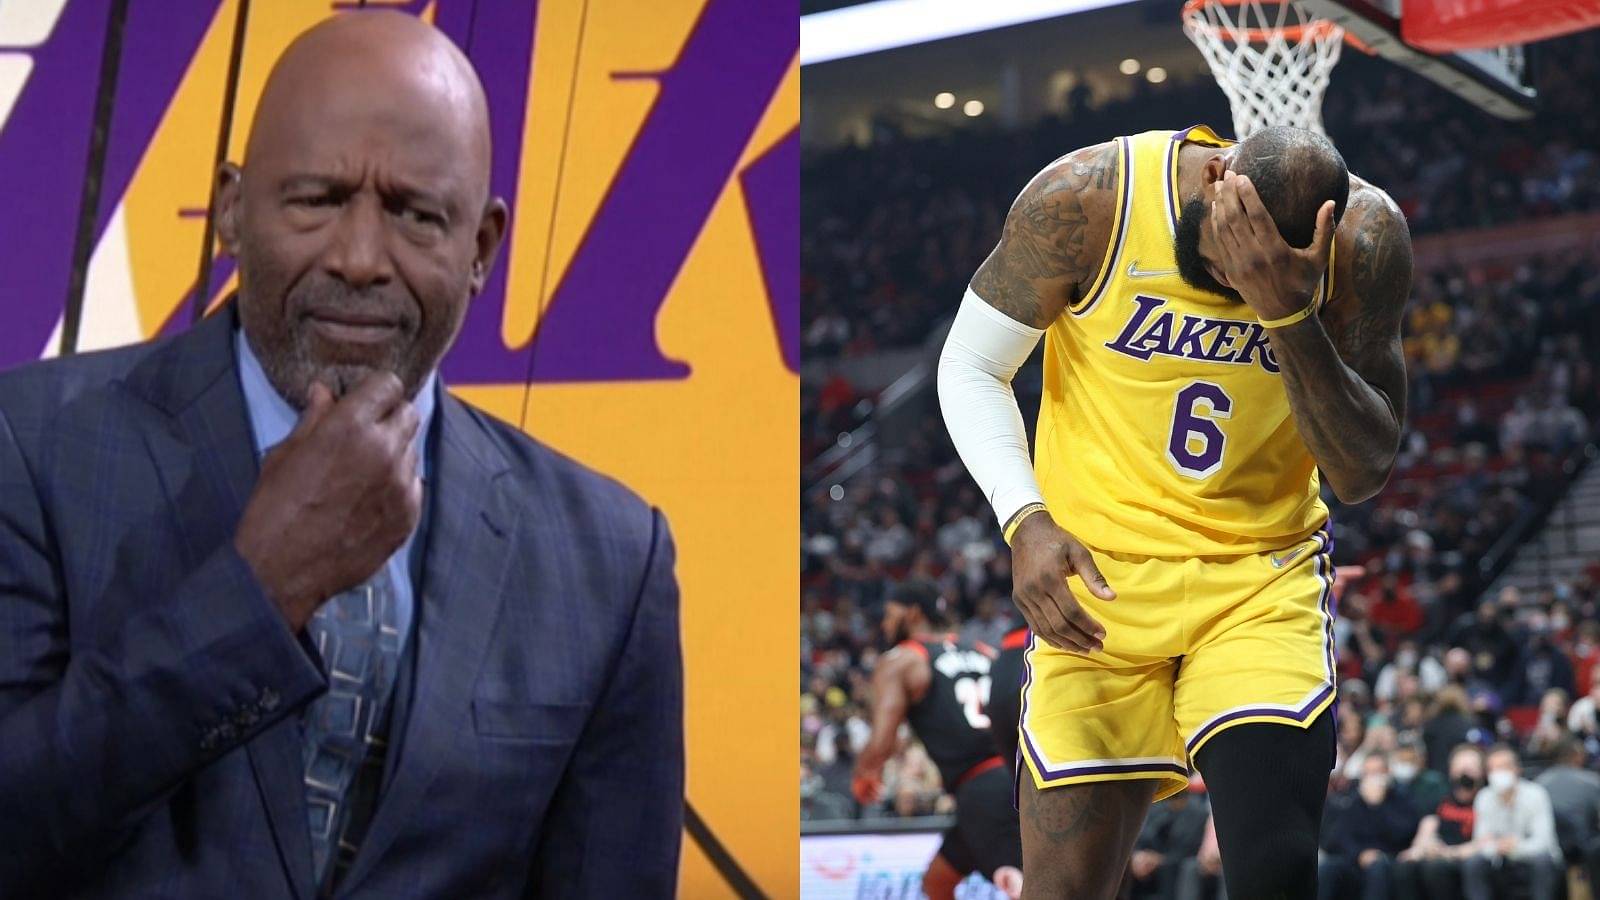 "This is the lowest point James Worthy has seen as a Laker over the years": NBA Hall of Famer is speechless as LeBron James and Co lose to a 'pickup' Blazers team